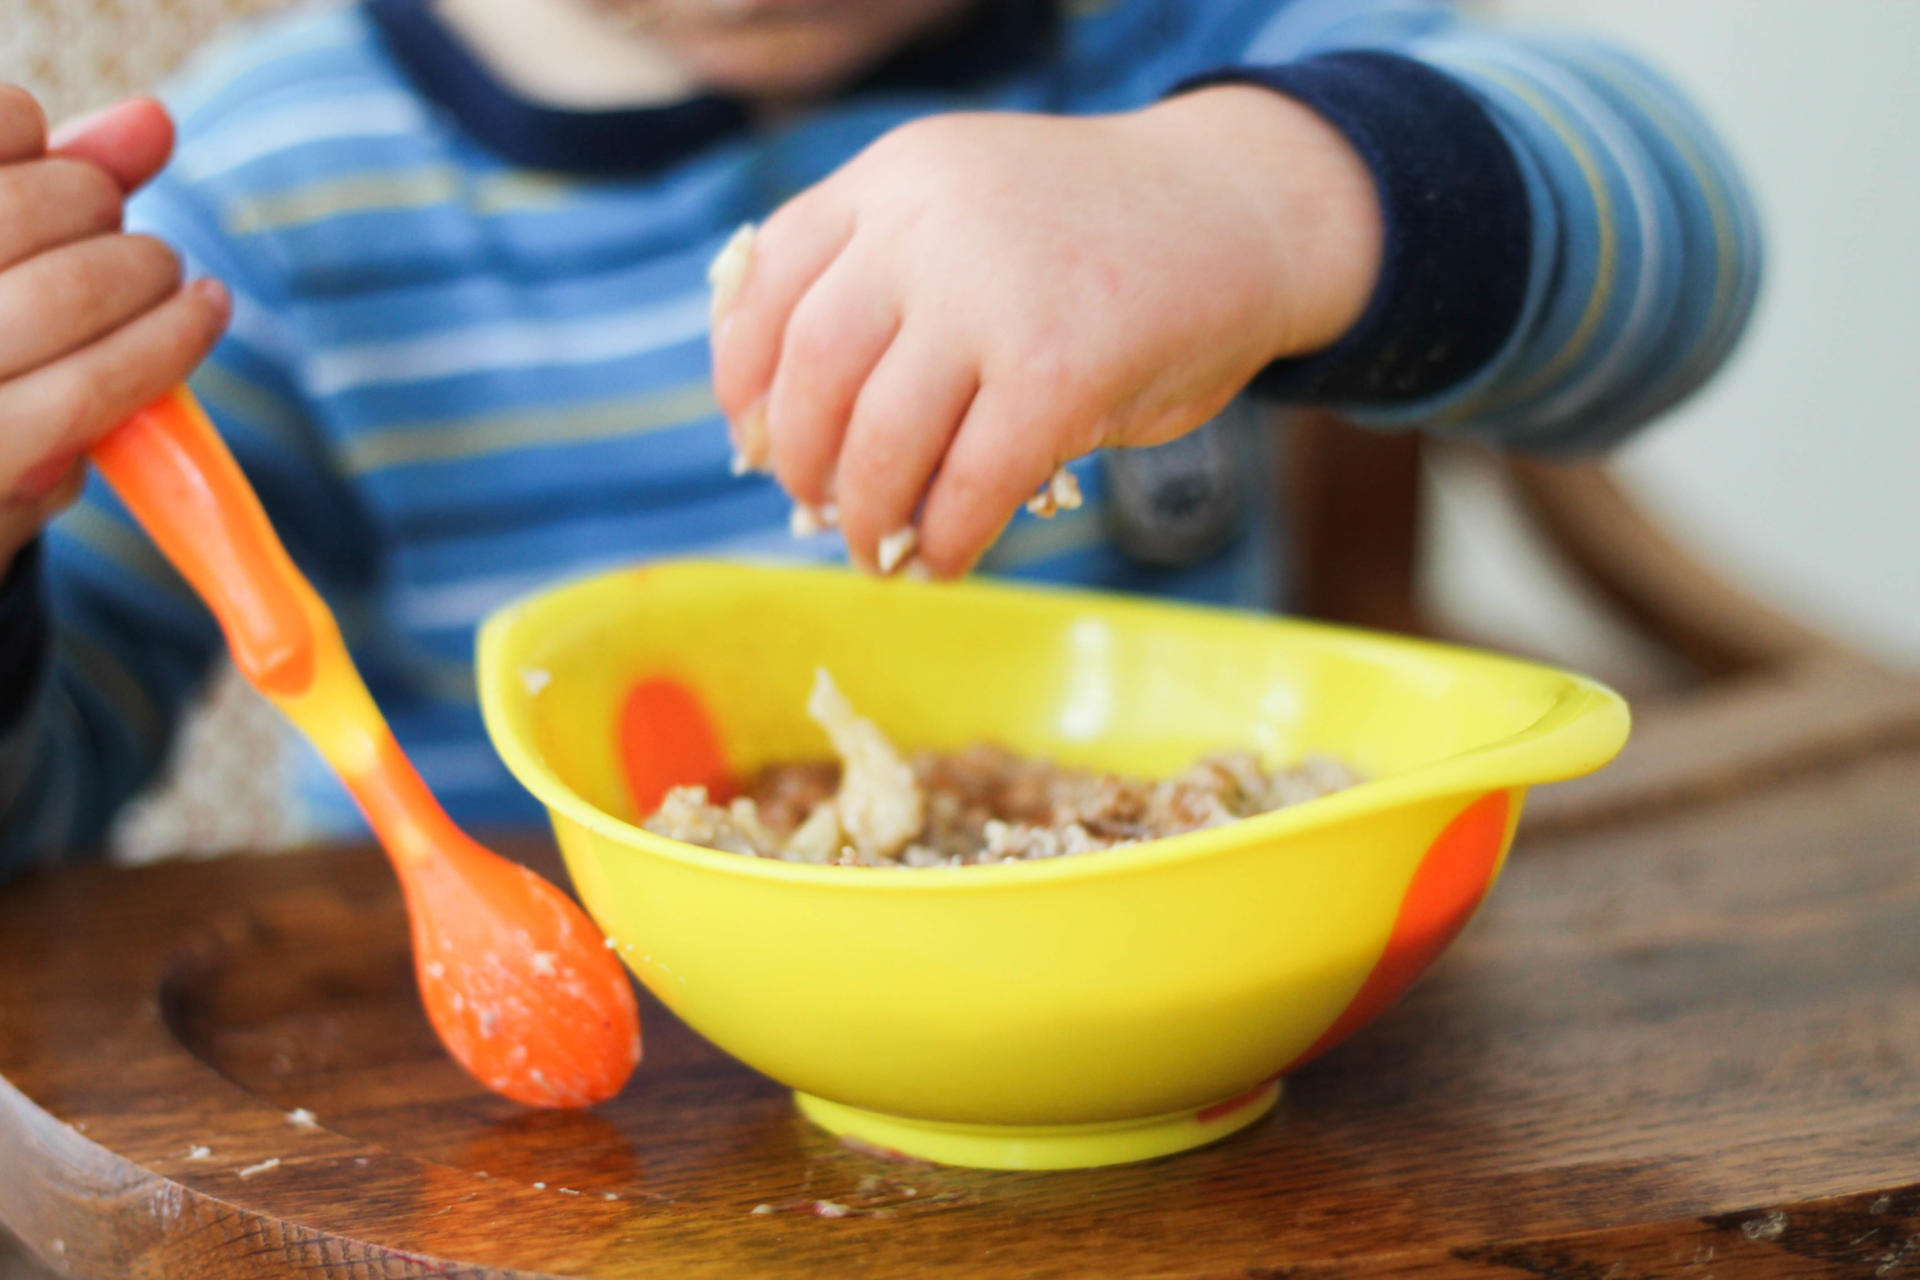 Breakfast Bowls For Your Baby